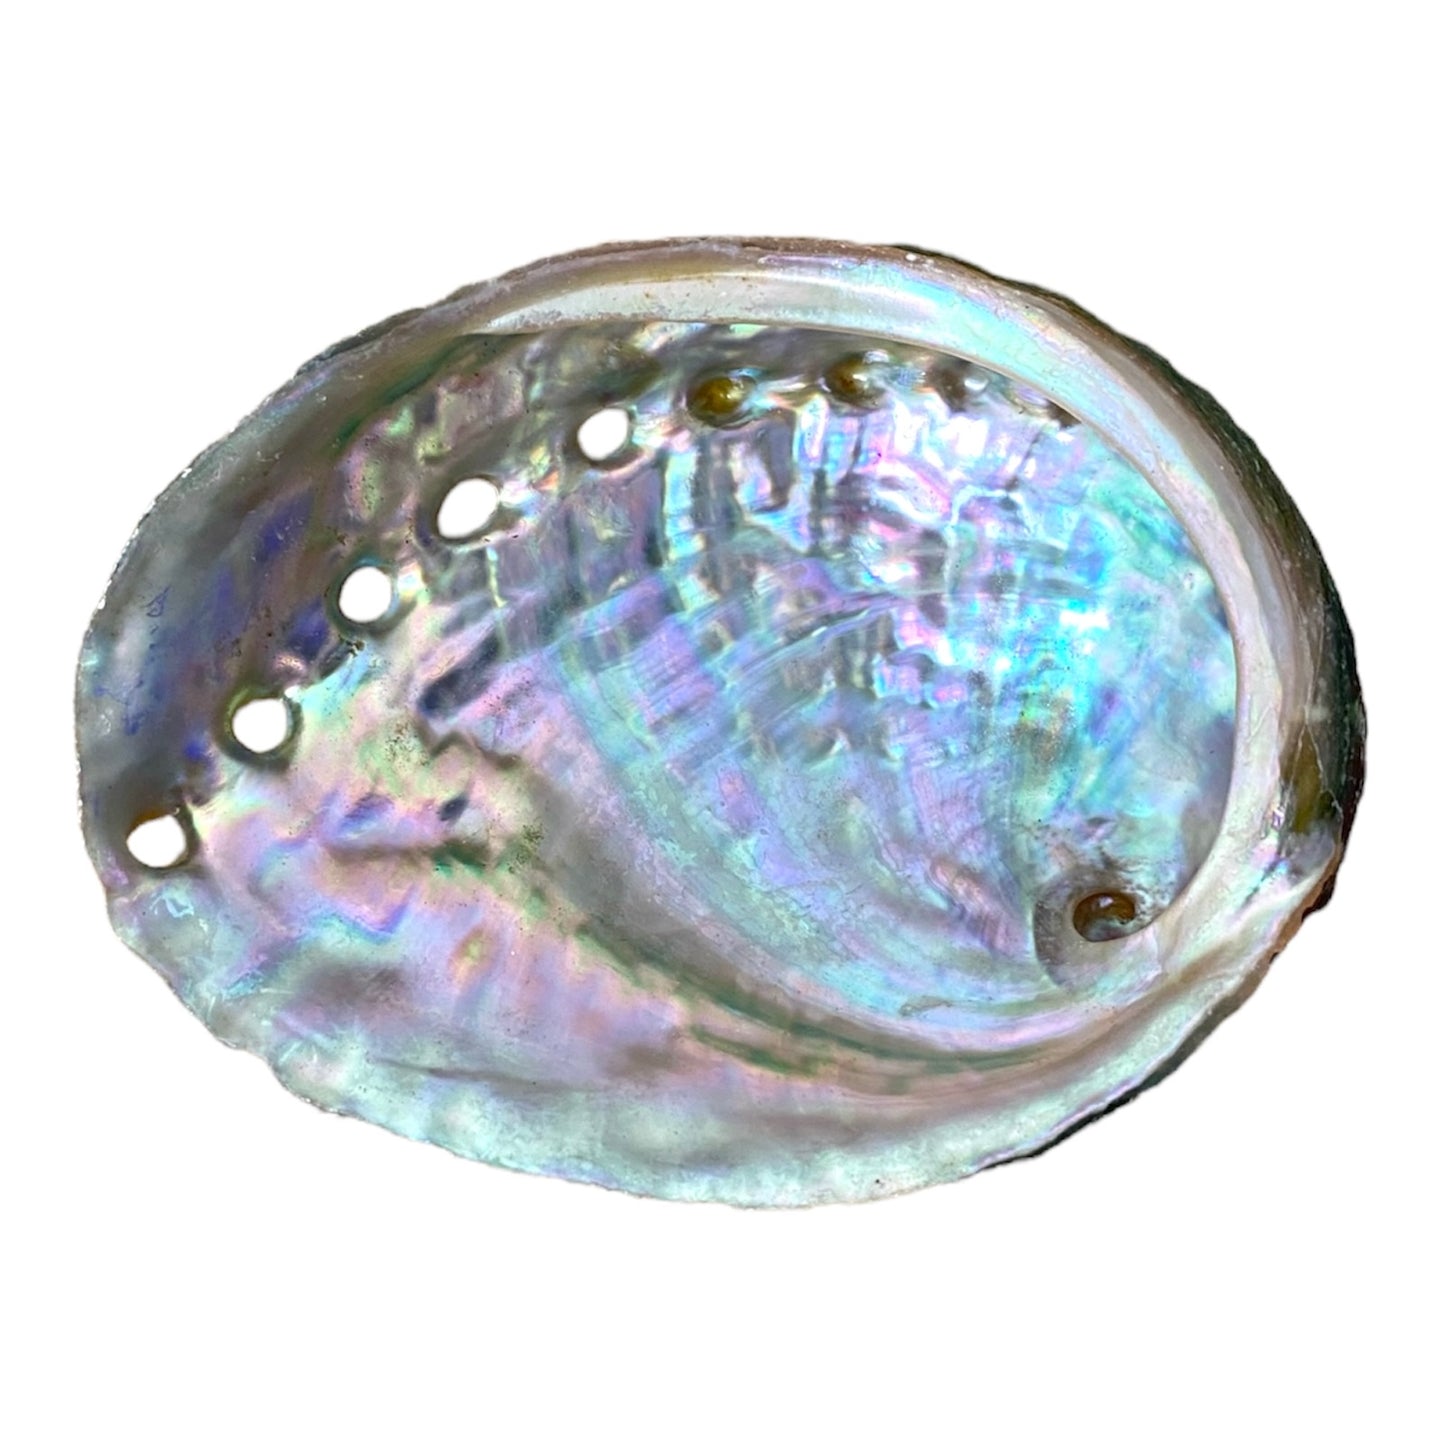 NessaStores 50 Abalone Shells 2.5 to 3.5 Inches | Beautiful All Natural Smudge Bowl - Perfect for Smudge Sticks, Incense Sticks and a Sage Smudge Kit. #JC-020